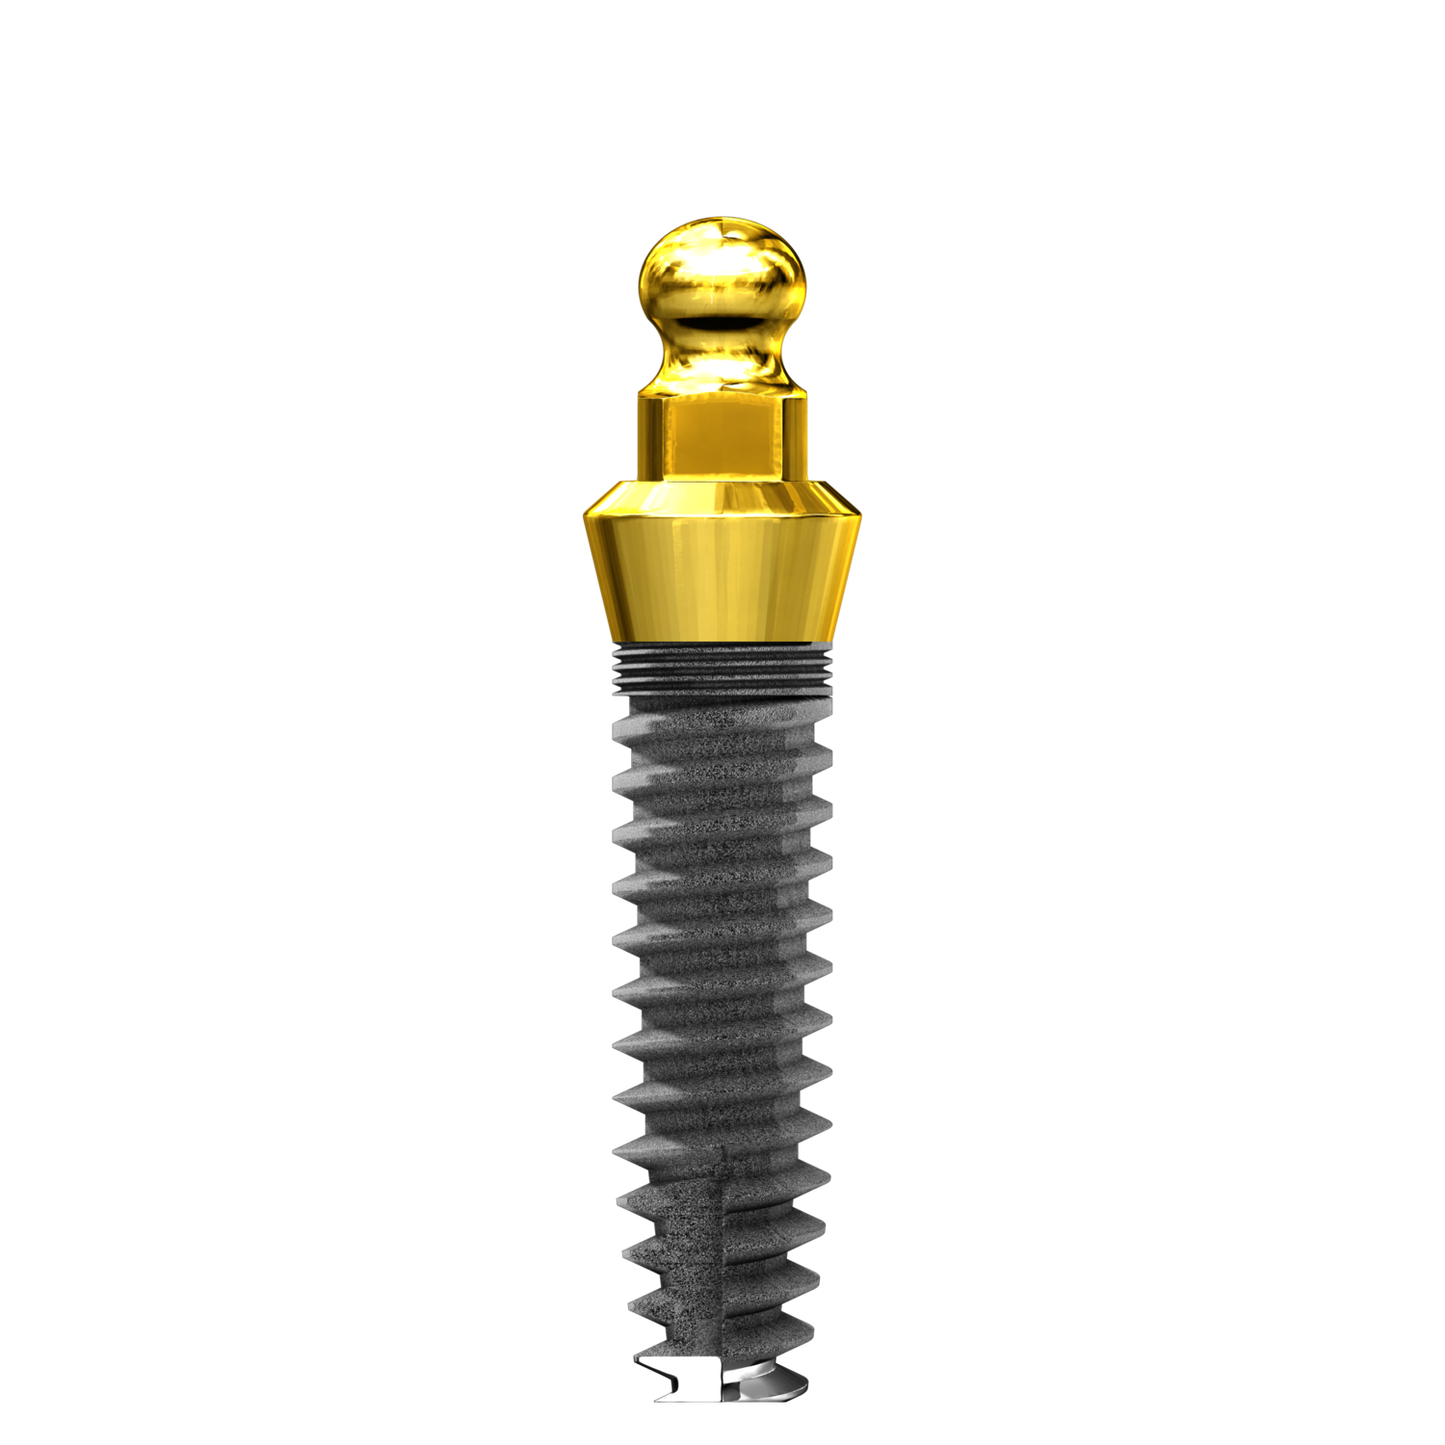 5.0mm x 8mm ISI C&B One Piece Implant